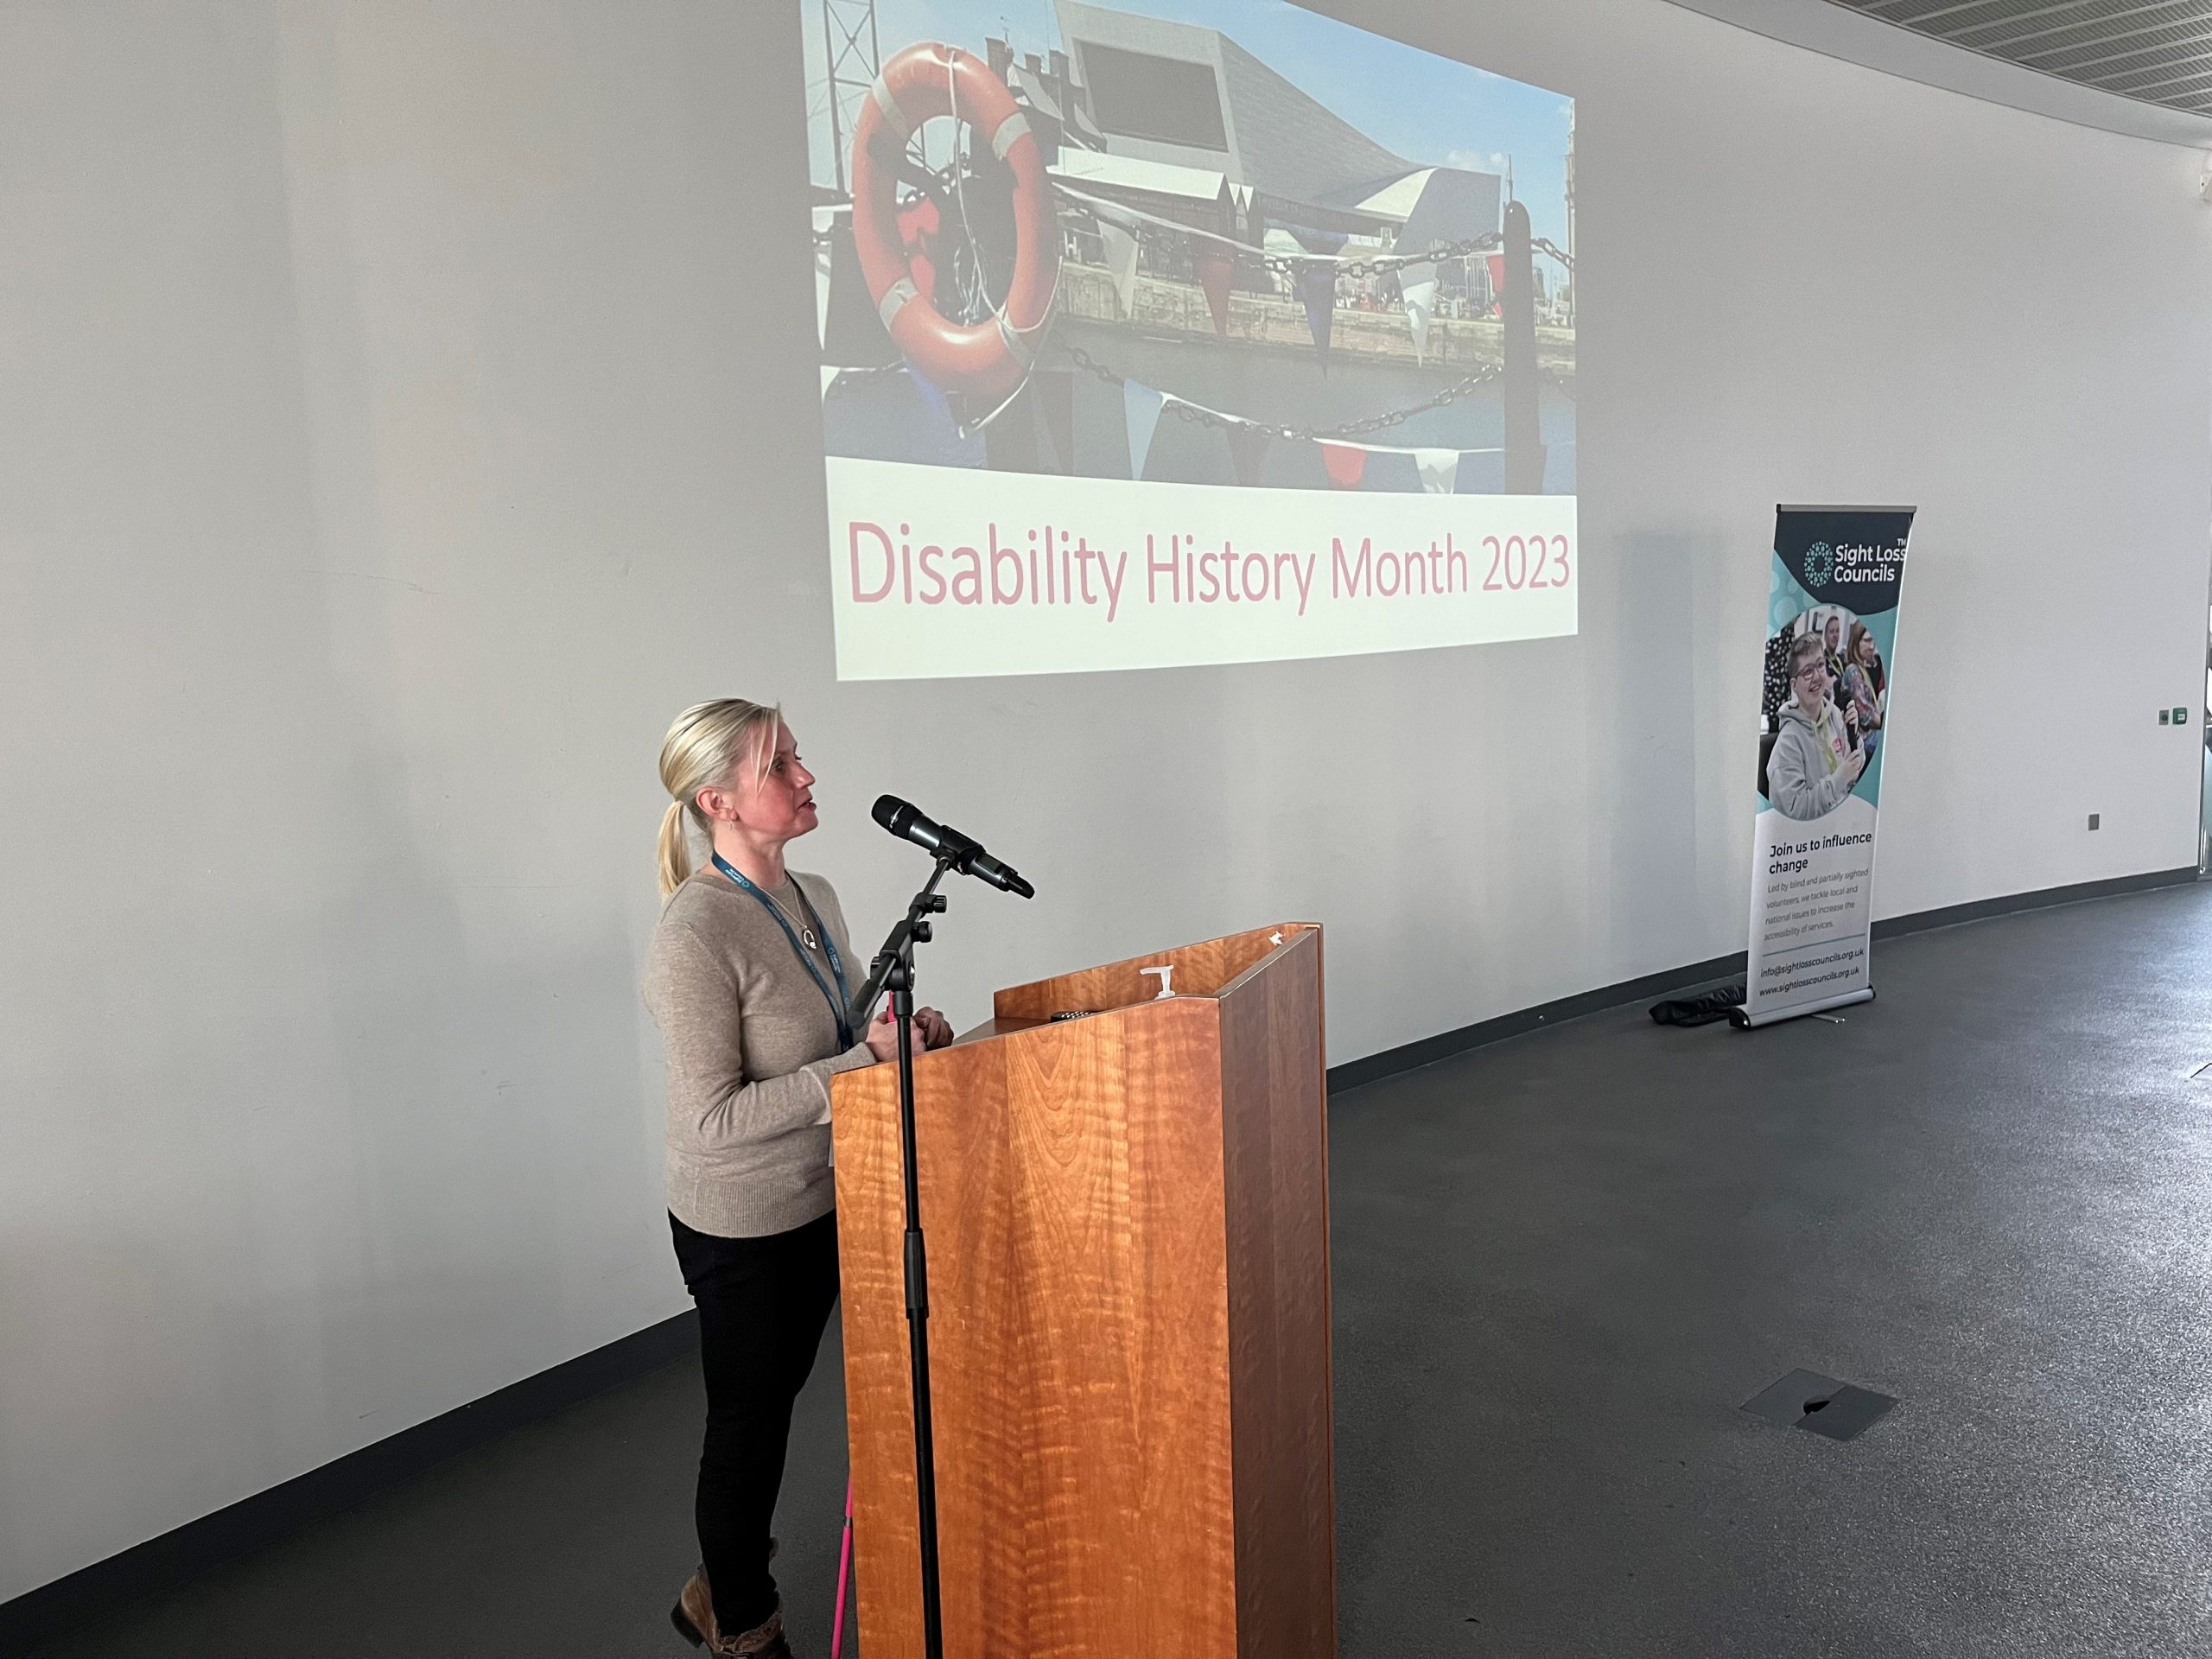 Kelly Barton, Engagement Manager for North West England, addressing delegates during the event. A presentation slide says ‘Disability Awareness Month’ 2023 and there is a Sight Loss Council banner in the background.